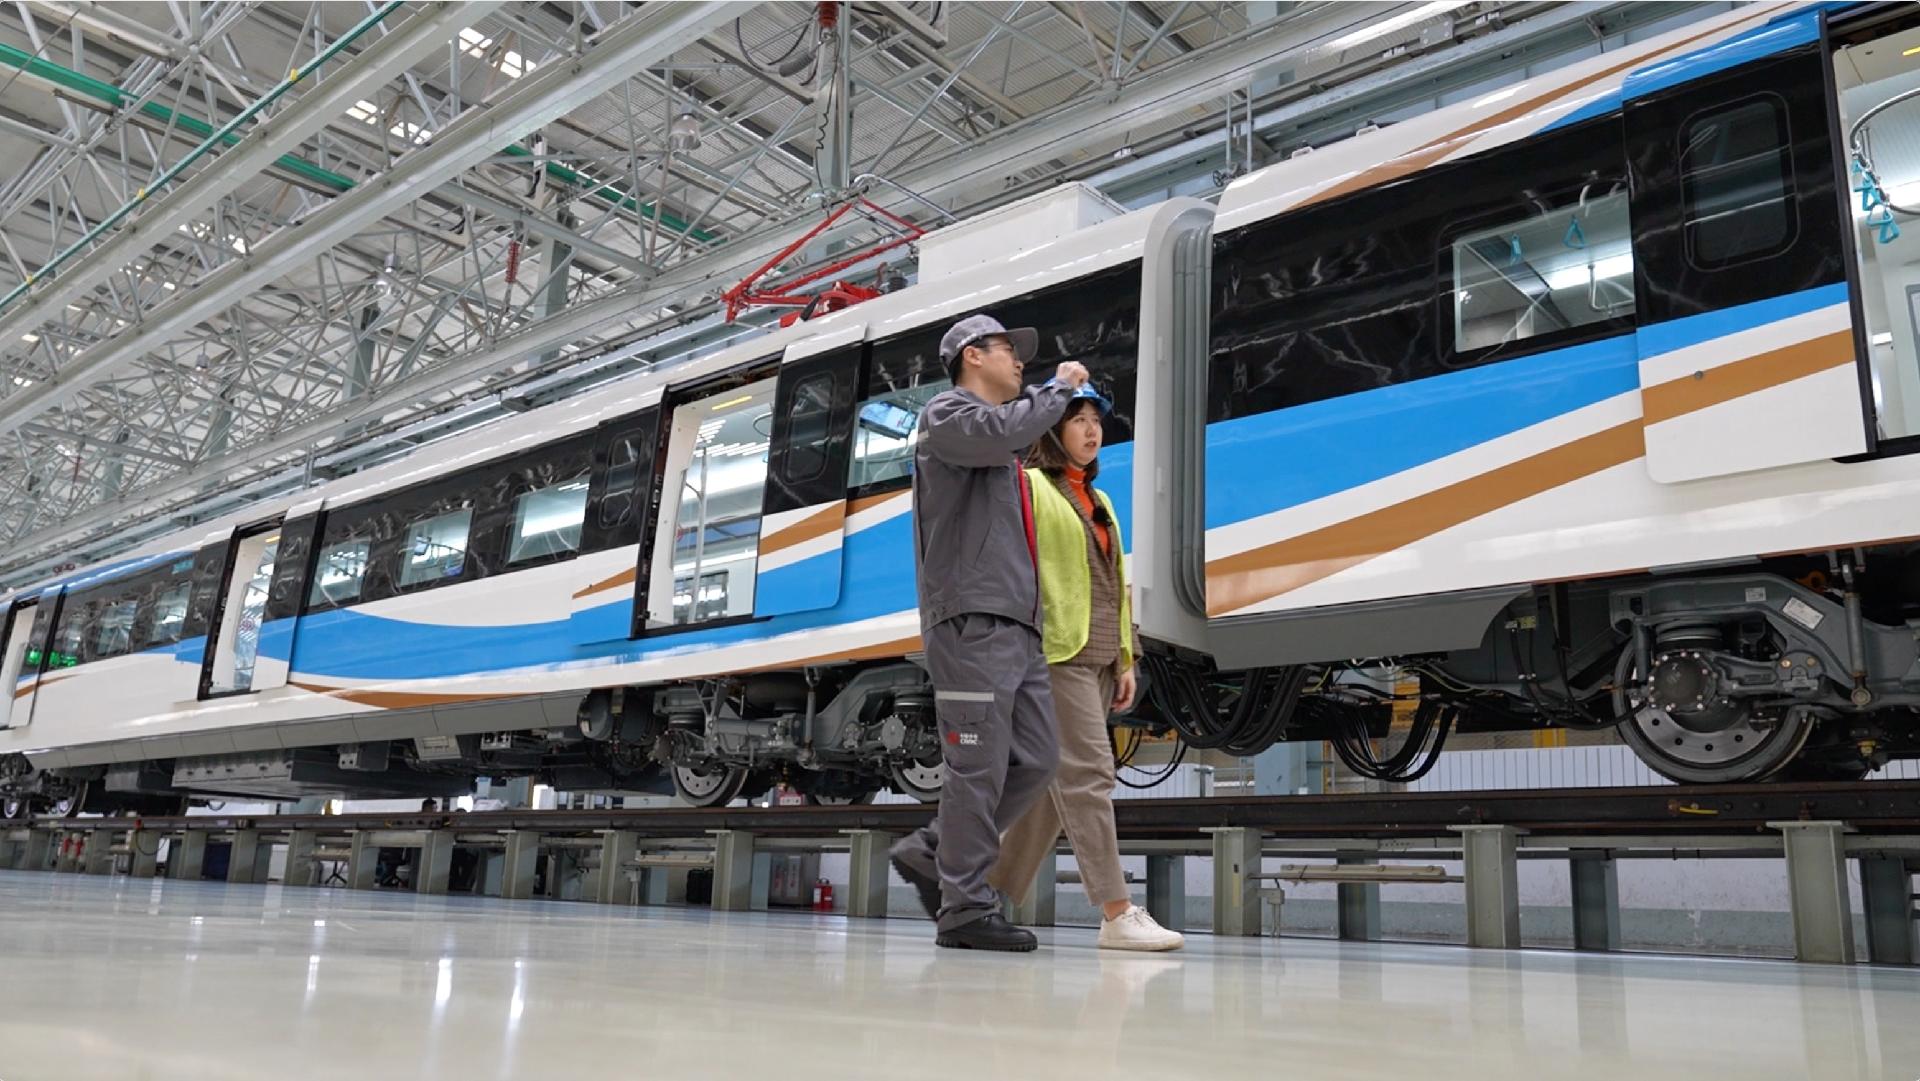 How China’s fast trains help fuel economic growth [Video]